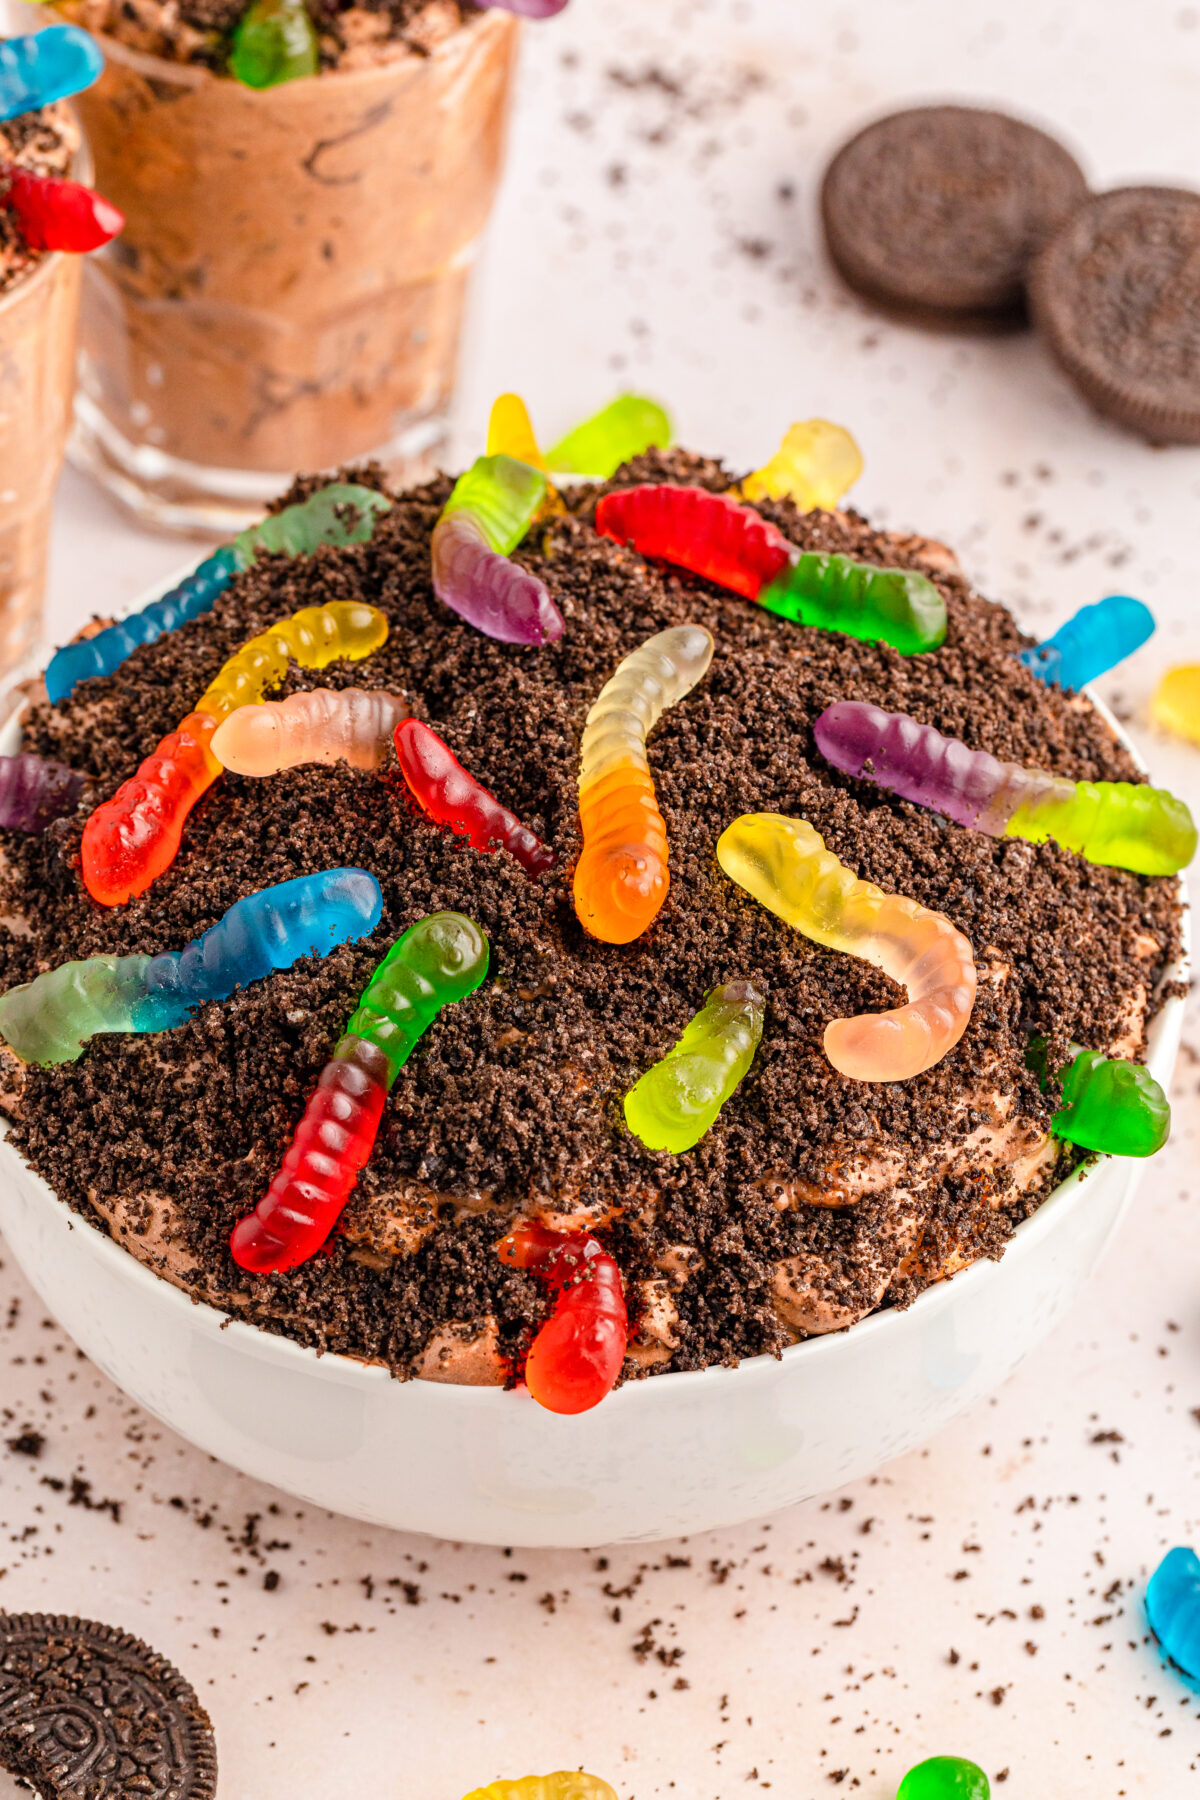 Satisfy your sweet tooth with this delicious and kid-friendly dirt pudding recipe. Perfect for a Halloween treat or an Earth Day celebration!